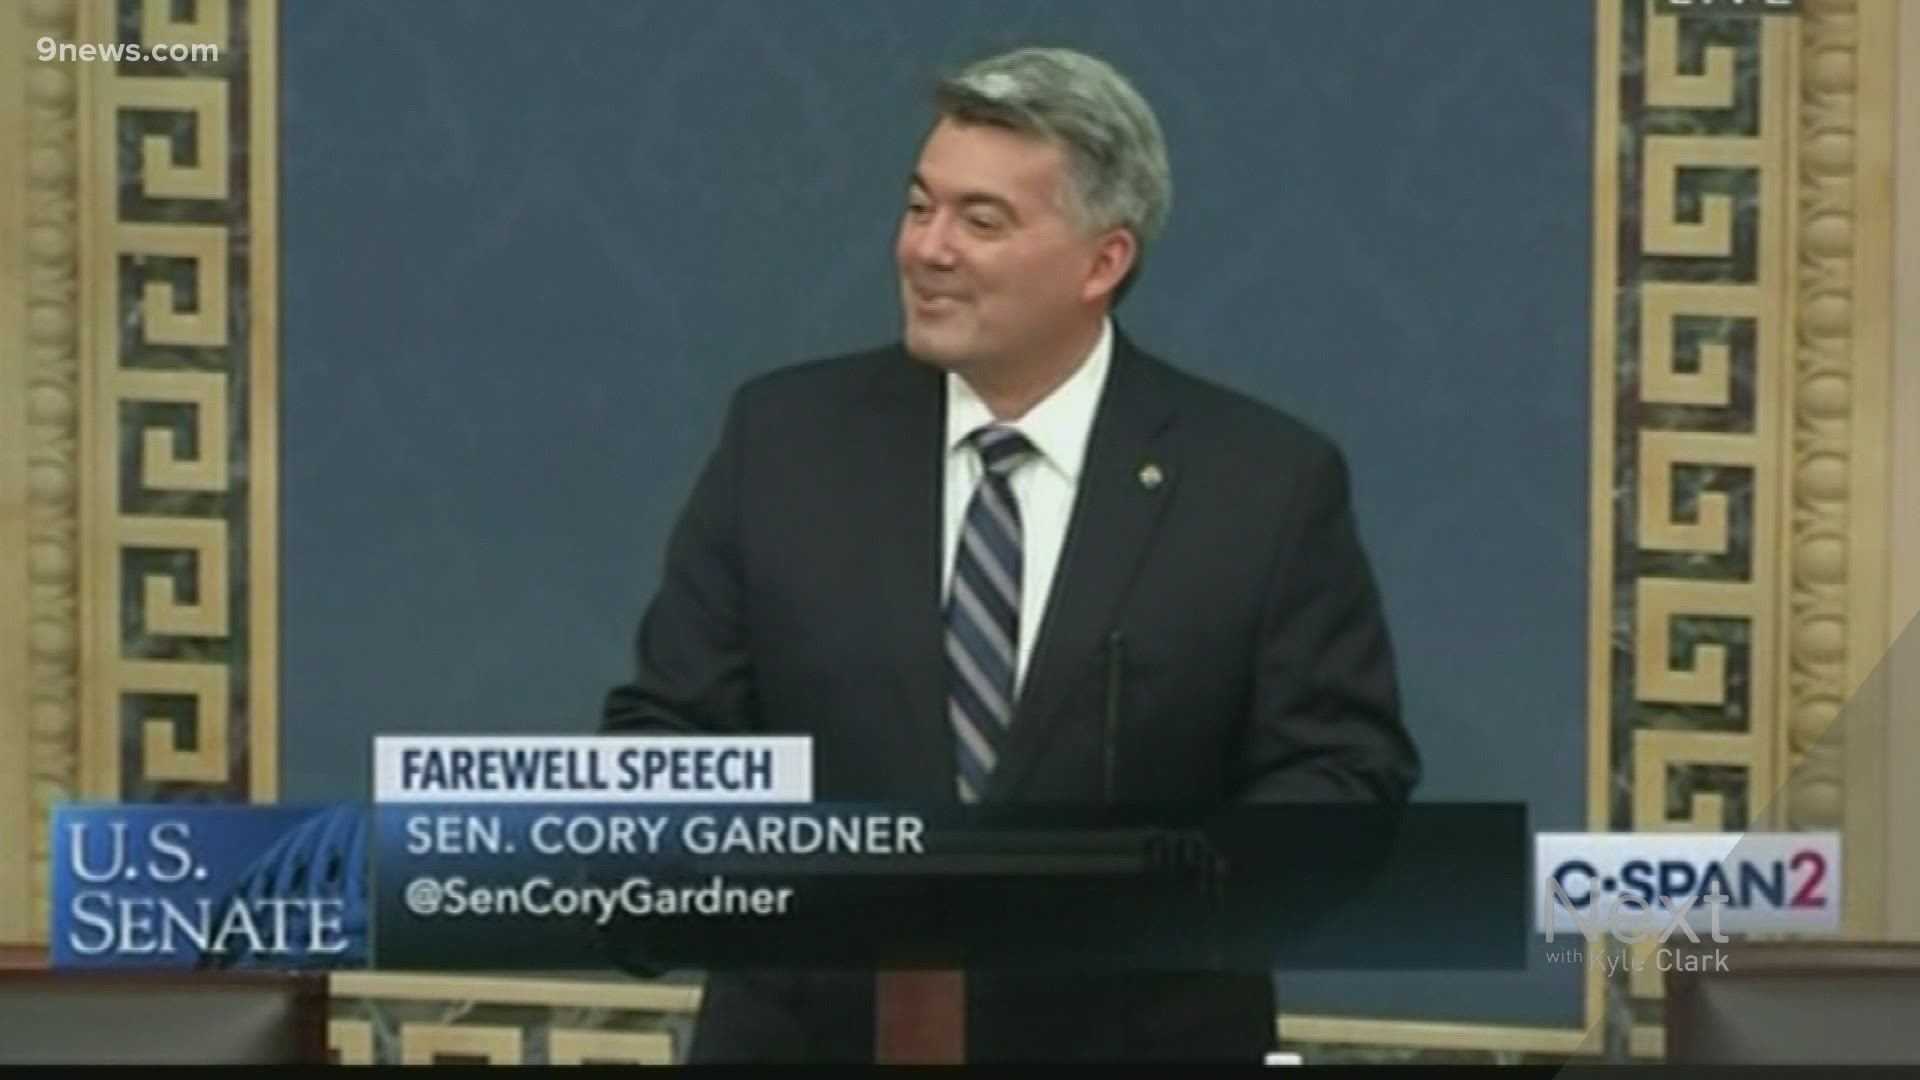 In his farewell speech to the U.S. Senate Tuesday, Cory Gardner called on his colleagues to work together to find solutions to shared challenges.